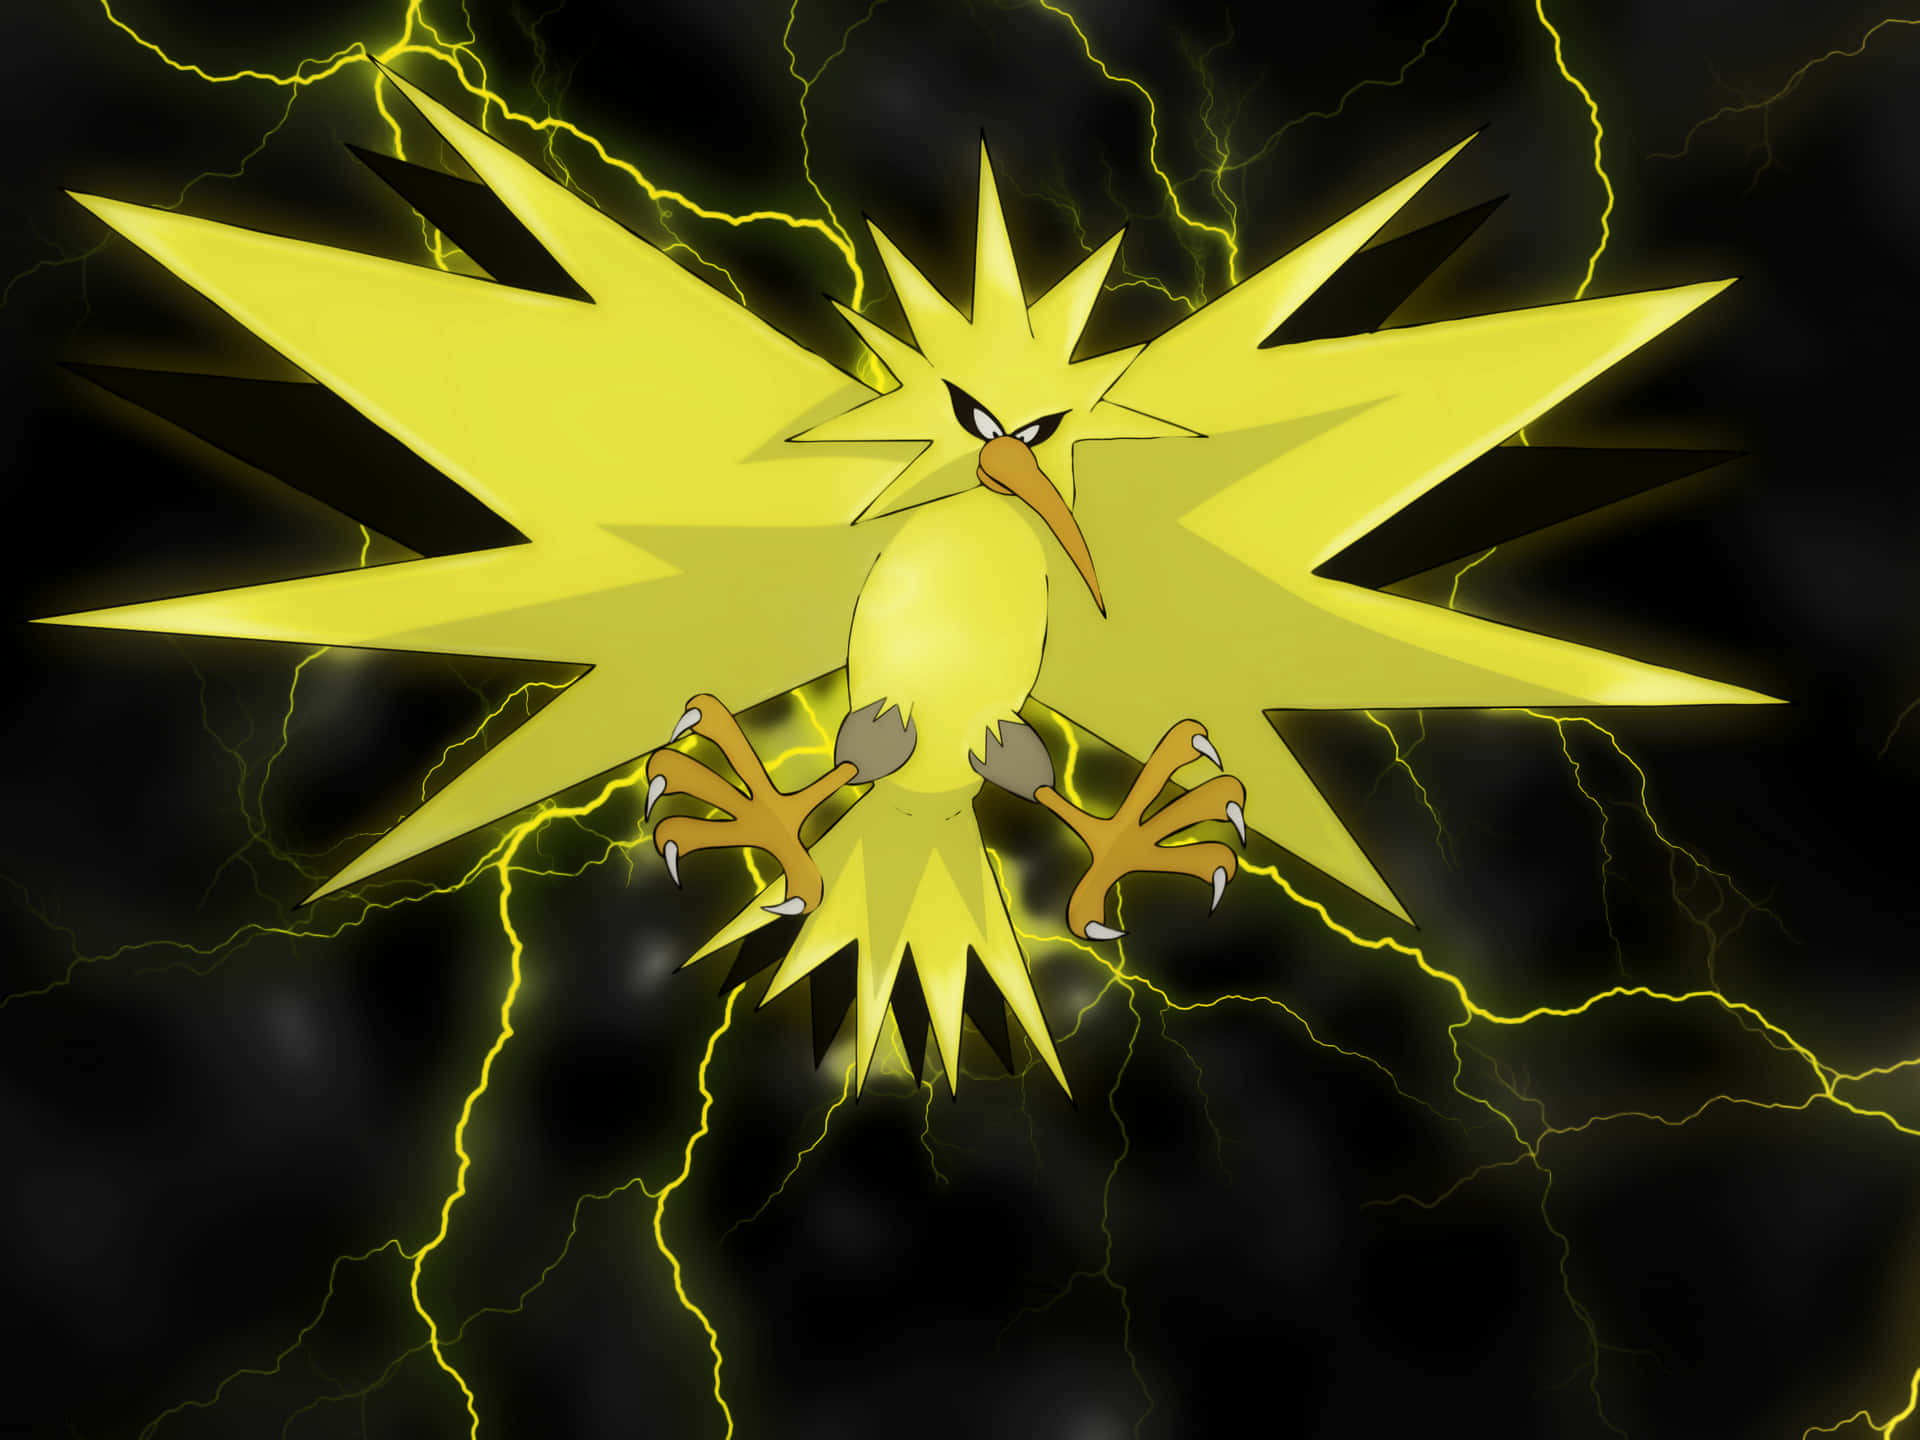 Zapdos With Open Claws Wallpaper